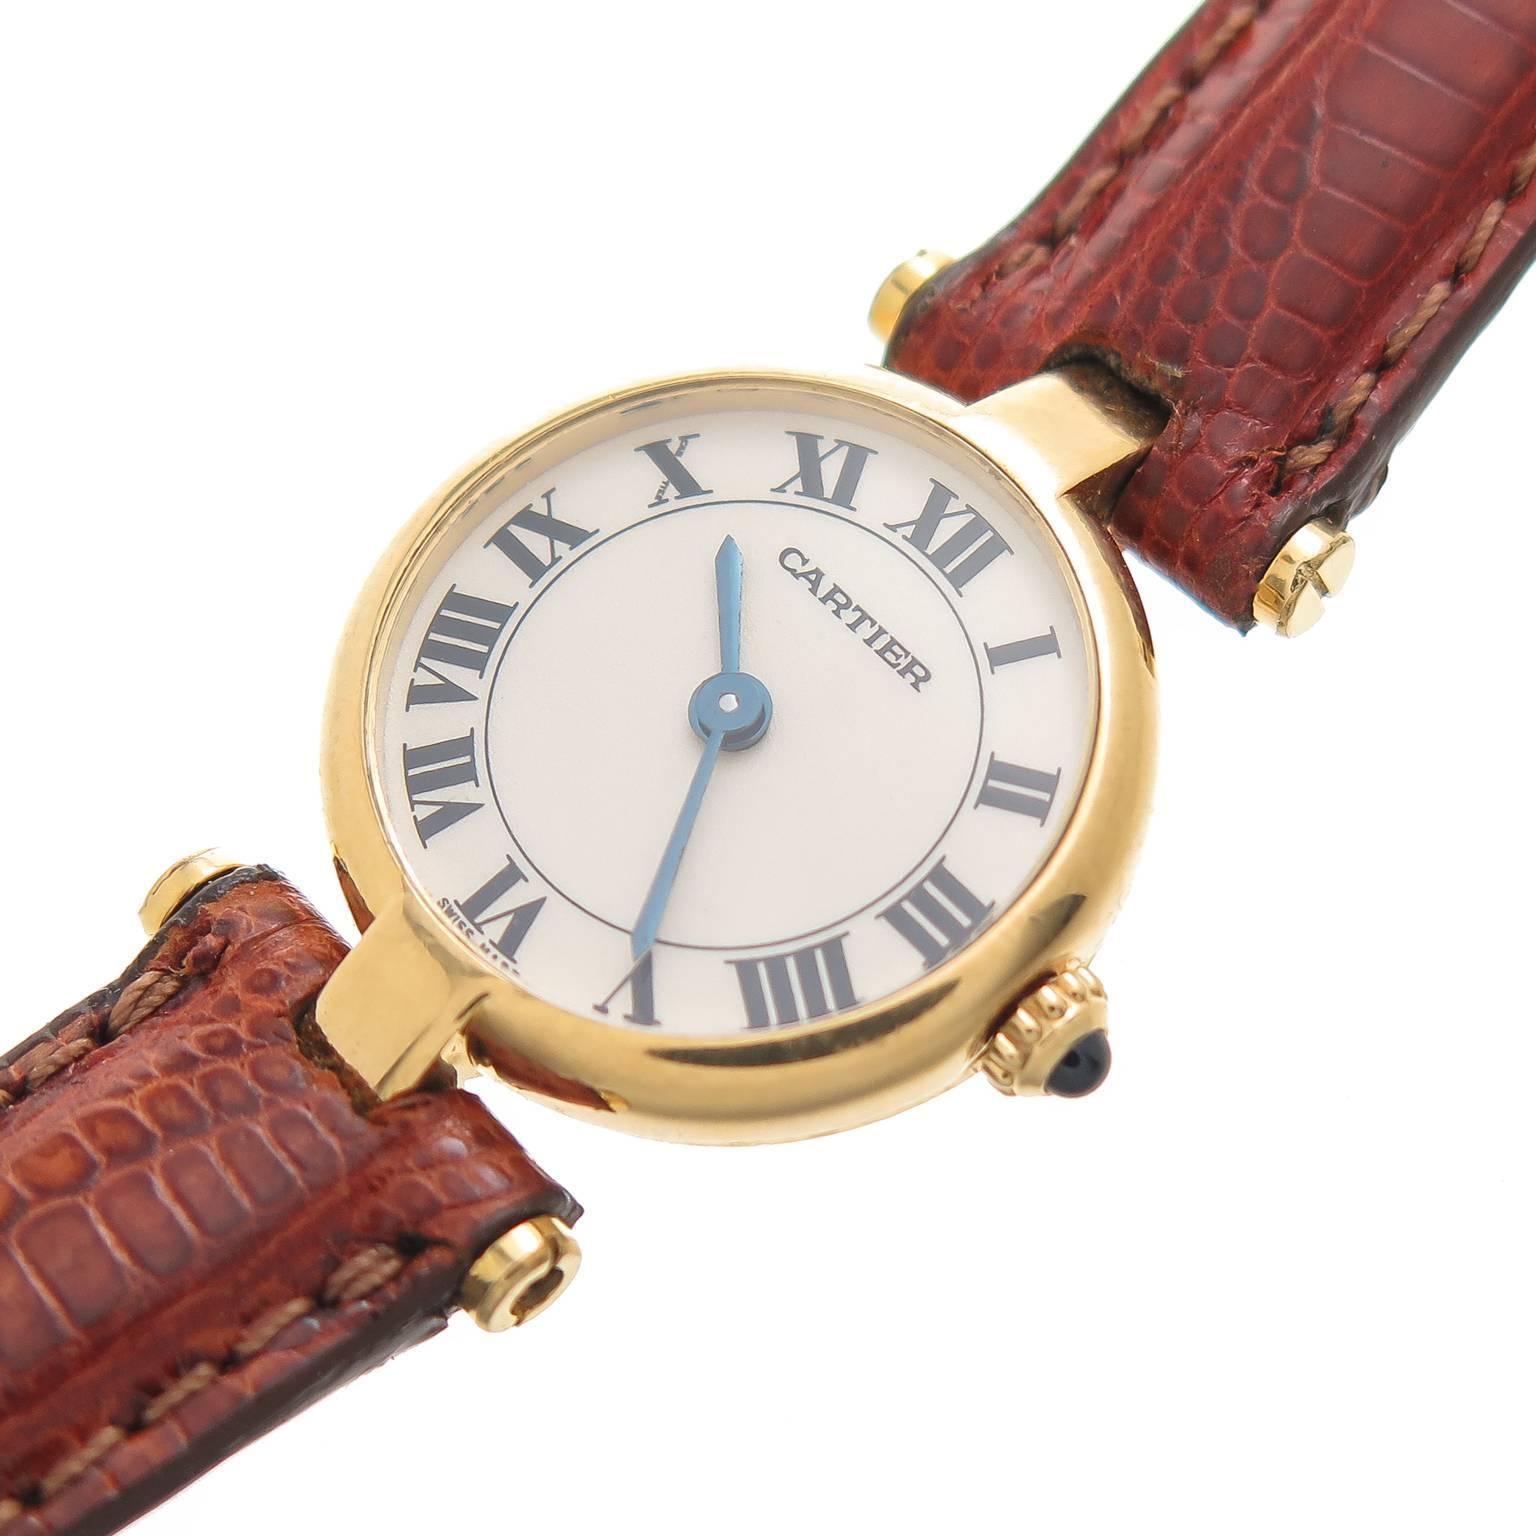 Circa 1990 Cartier Vendome Mini, 18K Yellow Gold 19 MM Diameter case, Quartz Movement, White Dial with Black roman Numerals, sapphire Crown. New Hadley Roma, brown Padded Lizard Strap, original Cartier Gold plated Tang Buckle. Cartier Red Suede